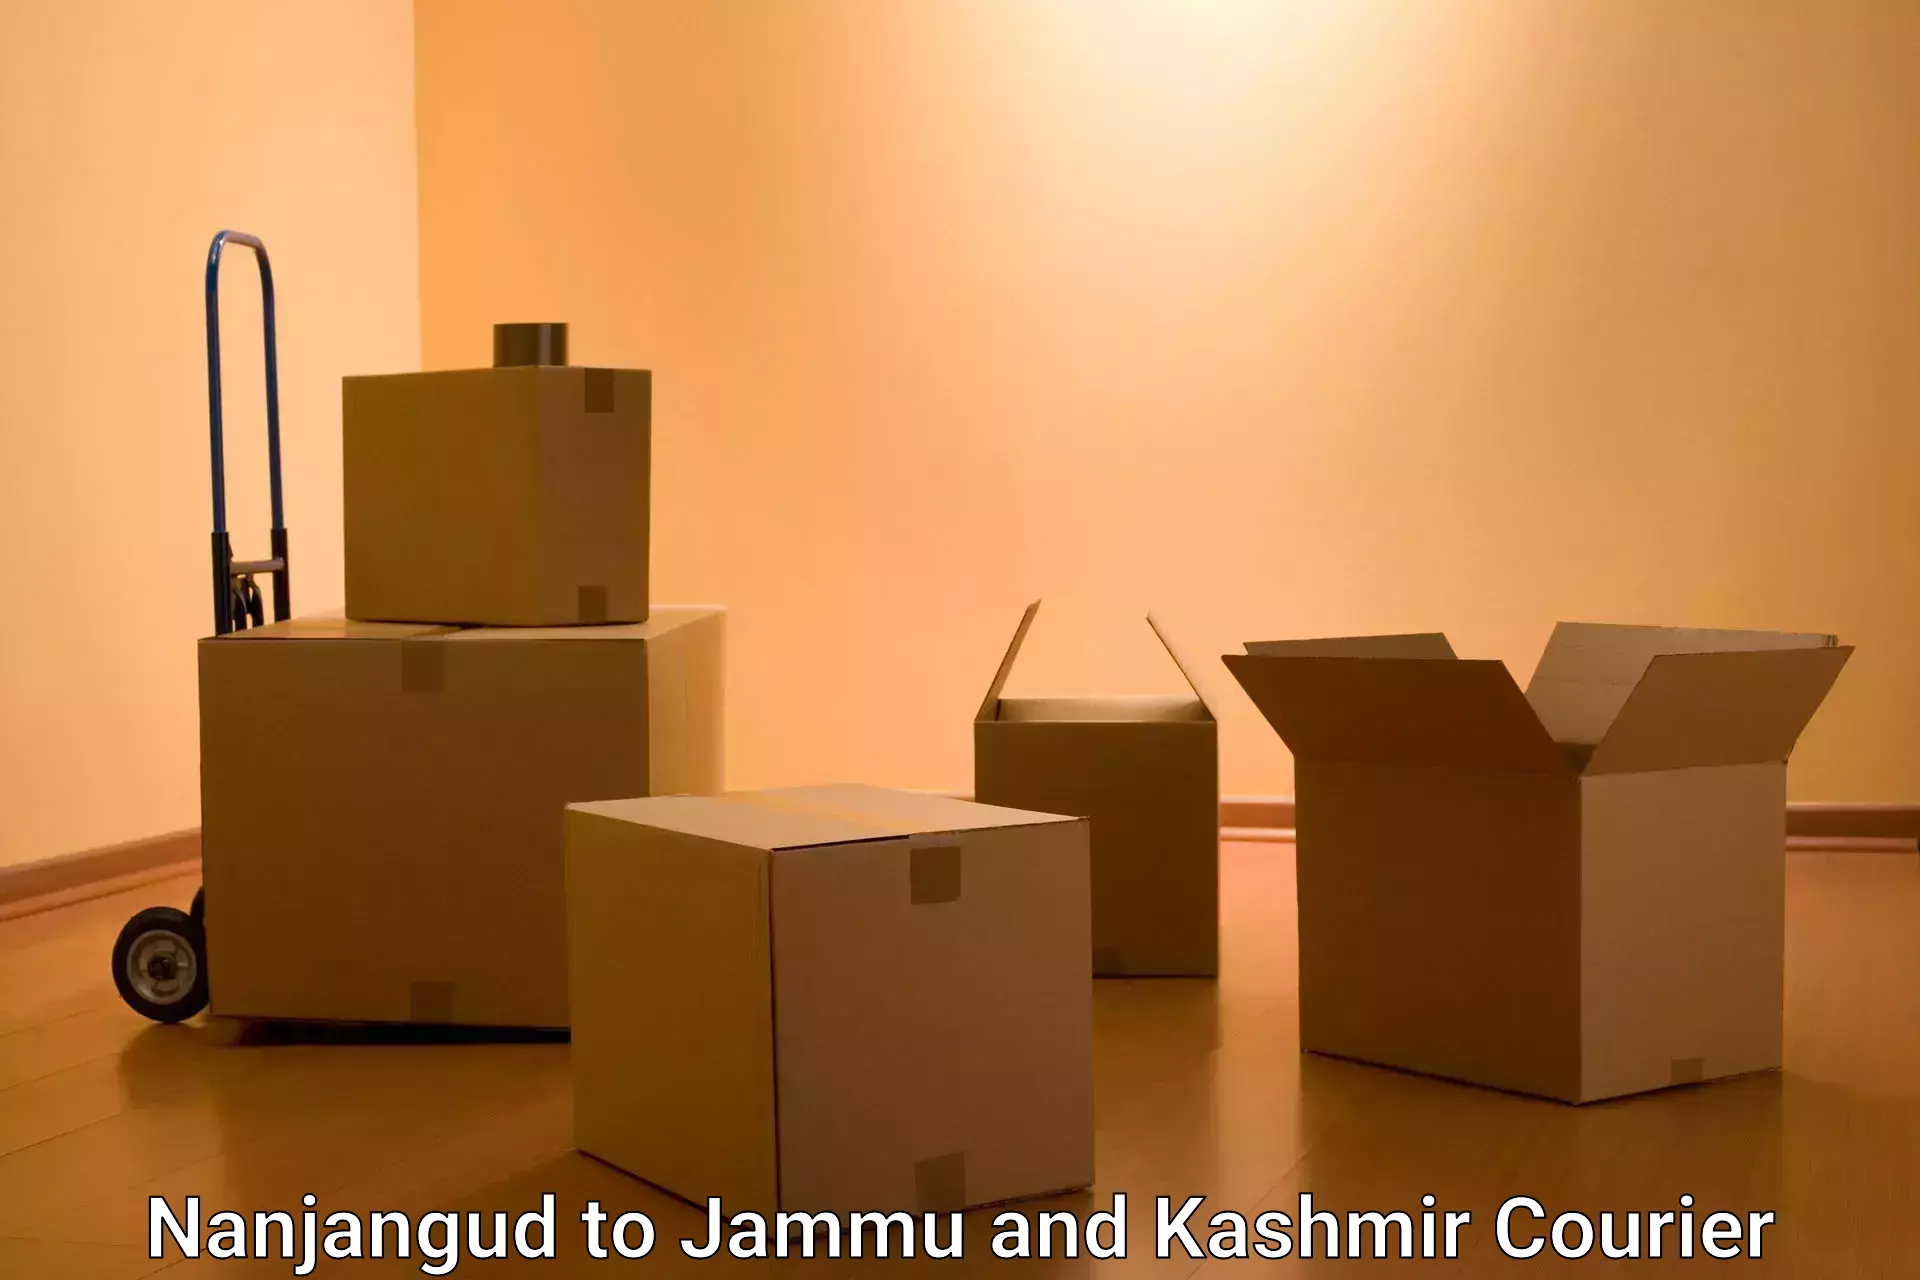 State-of-the-art courier technology Nanjangud to Kargil